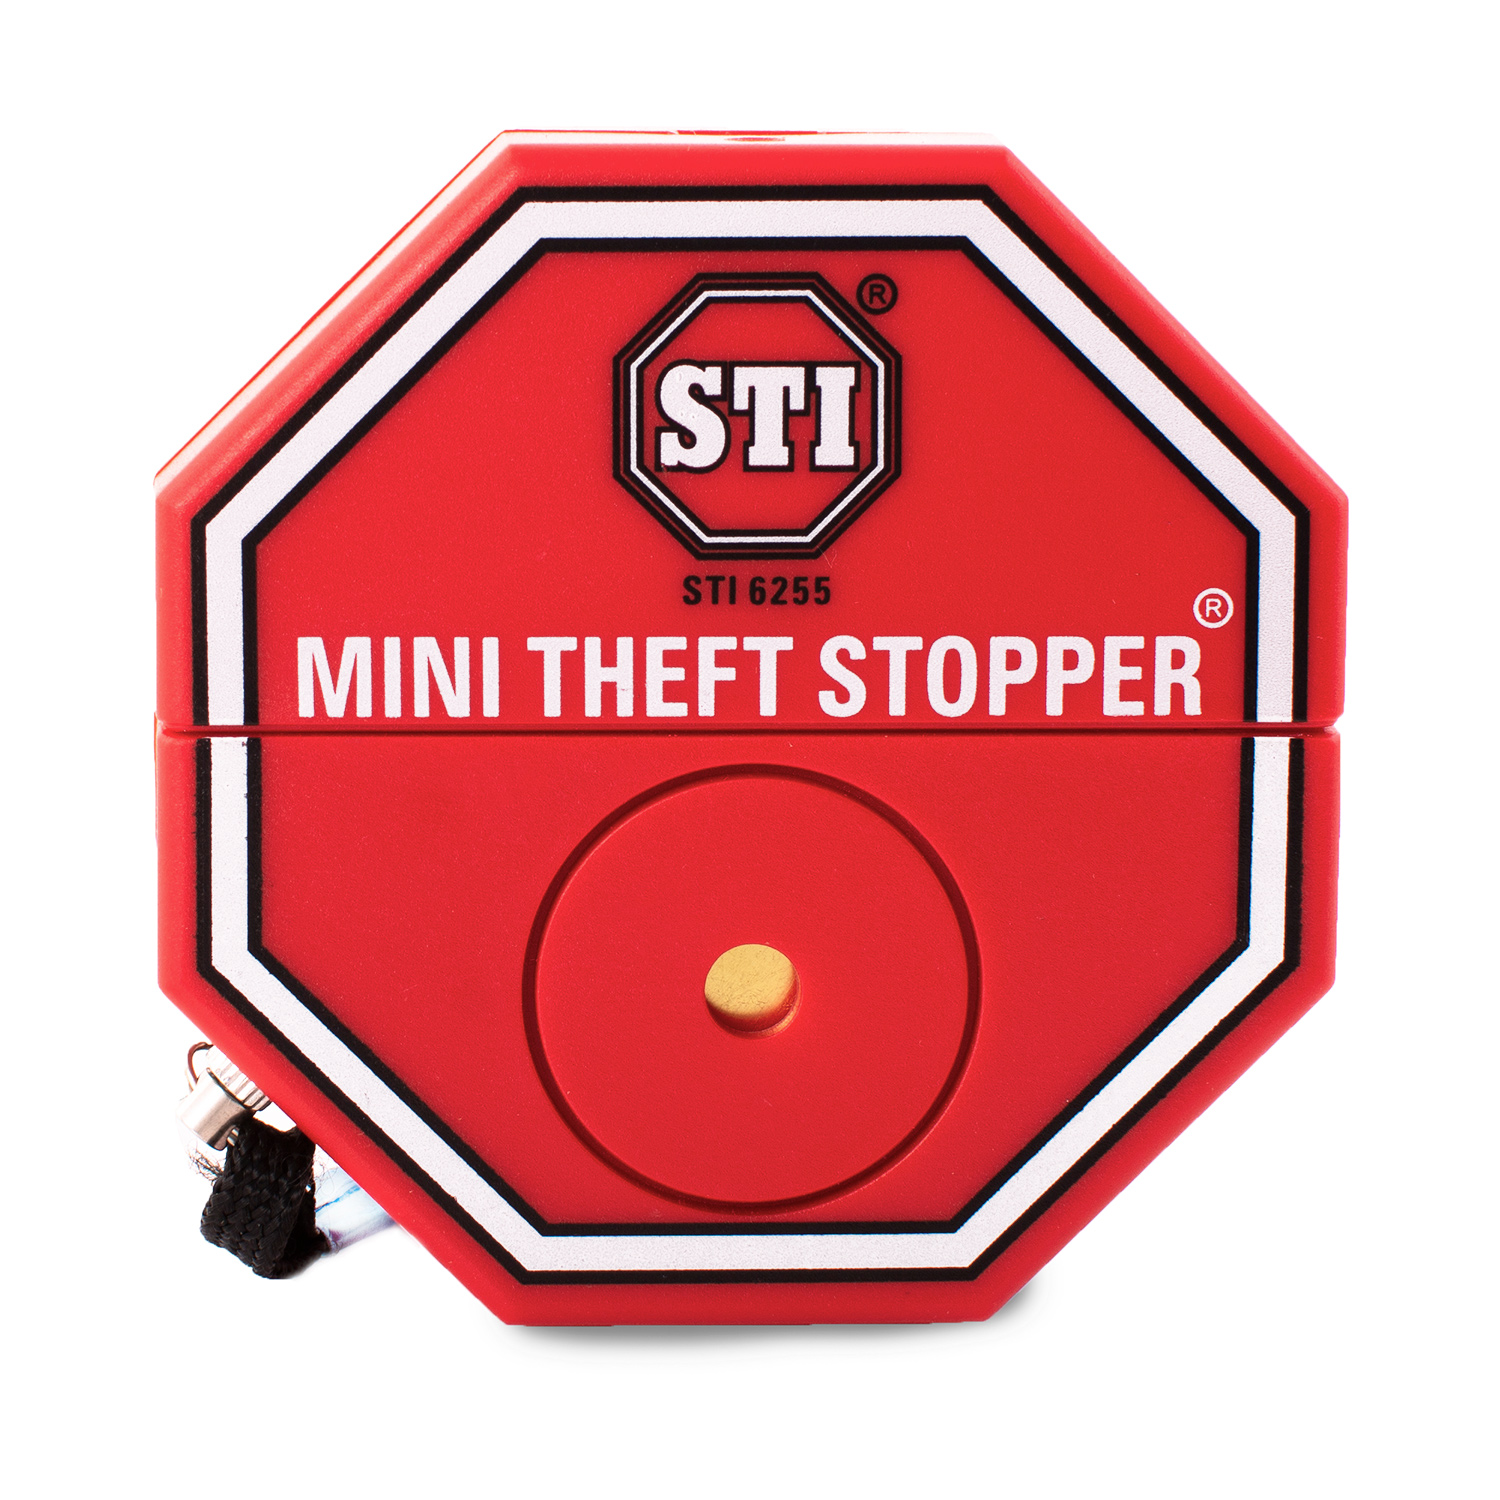 Image of the Mini Fire Extinguisher Theft Stopper STI 6255